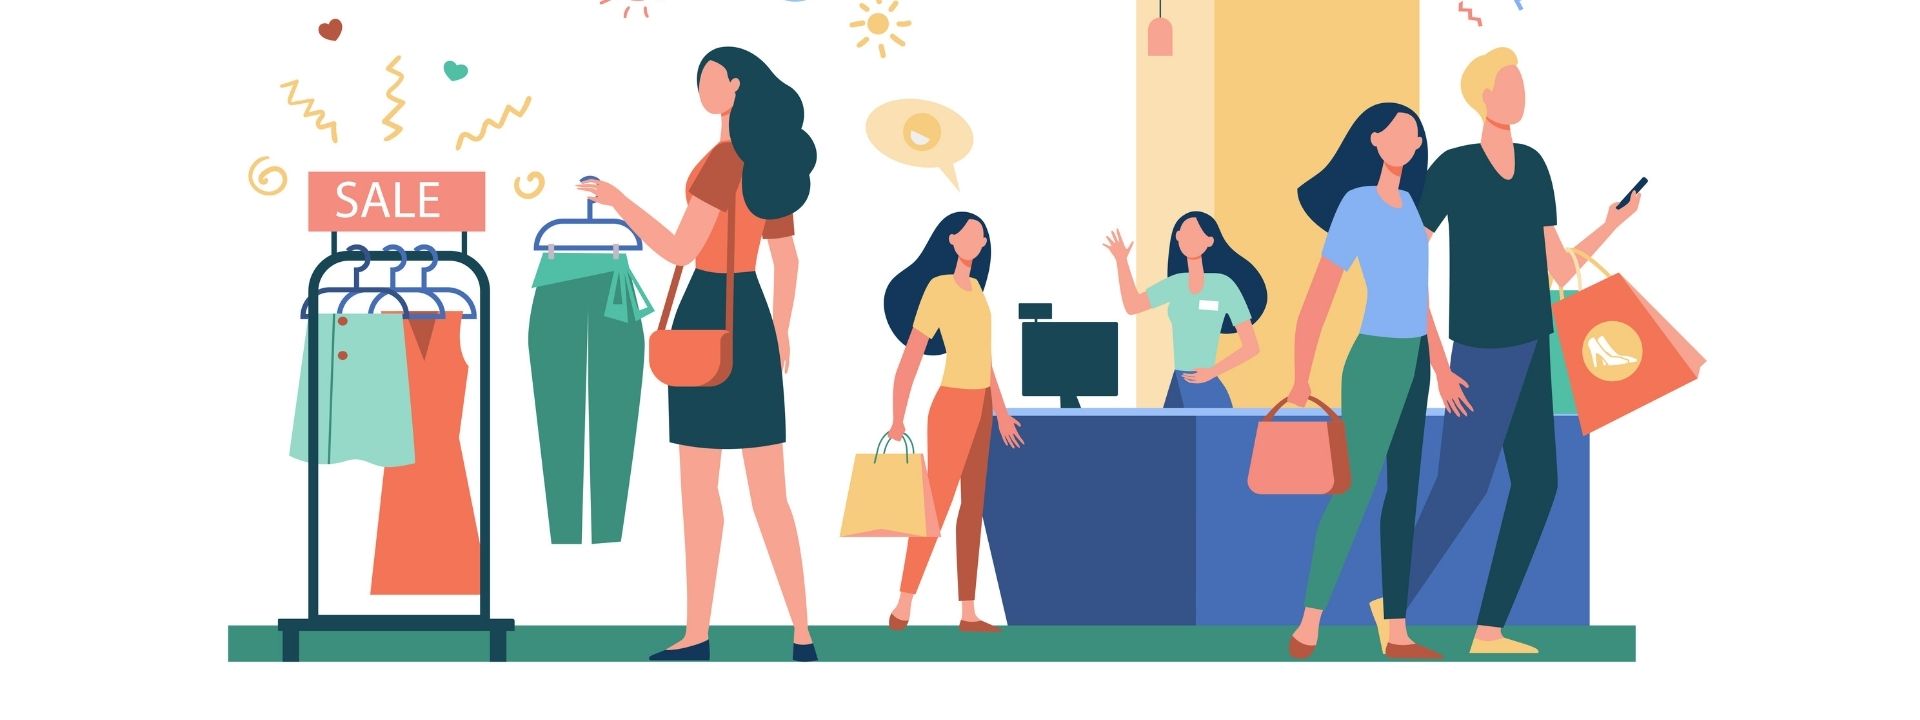 D2C brands are shifting to traditional retail to offer better connectivity to customers.